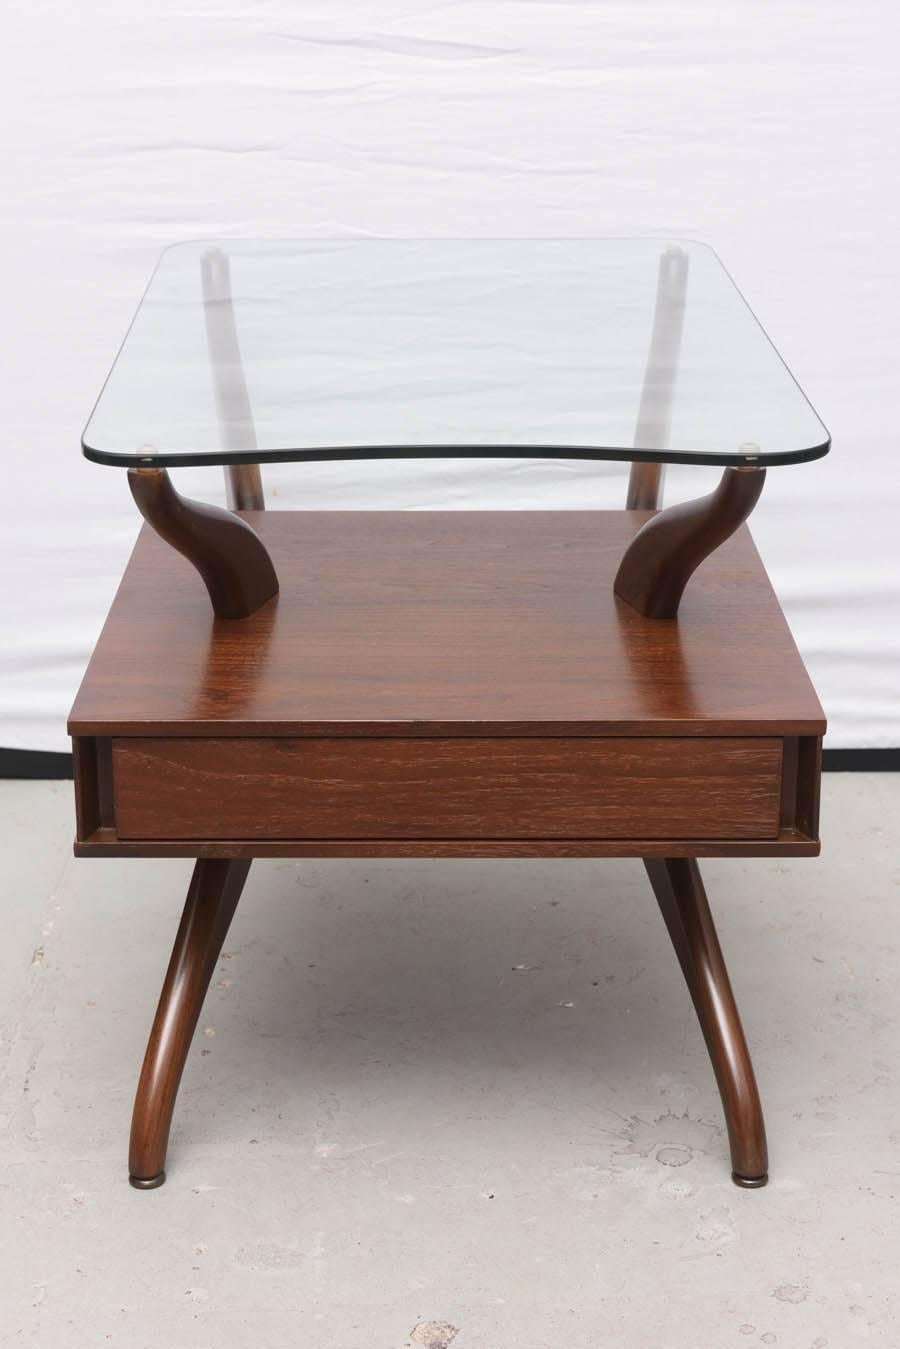 American Pair of End Tables in Glass and Walnut, 1950s, USA For Sale